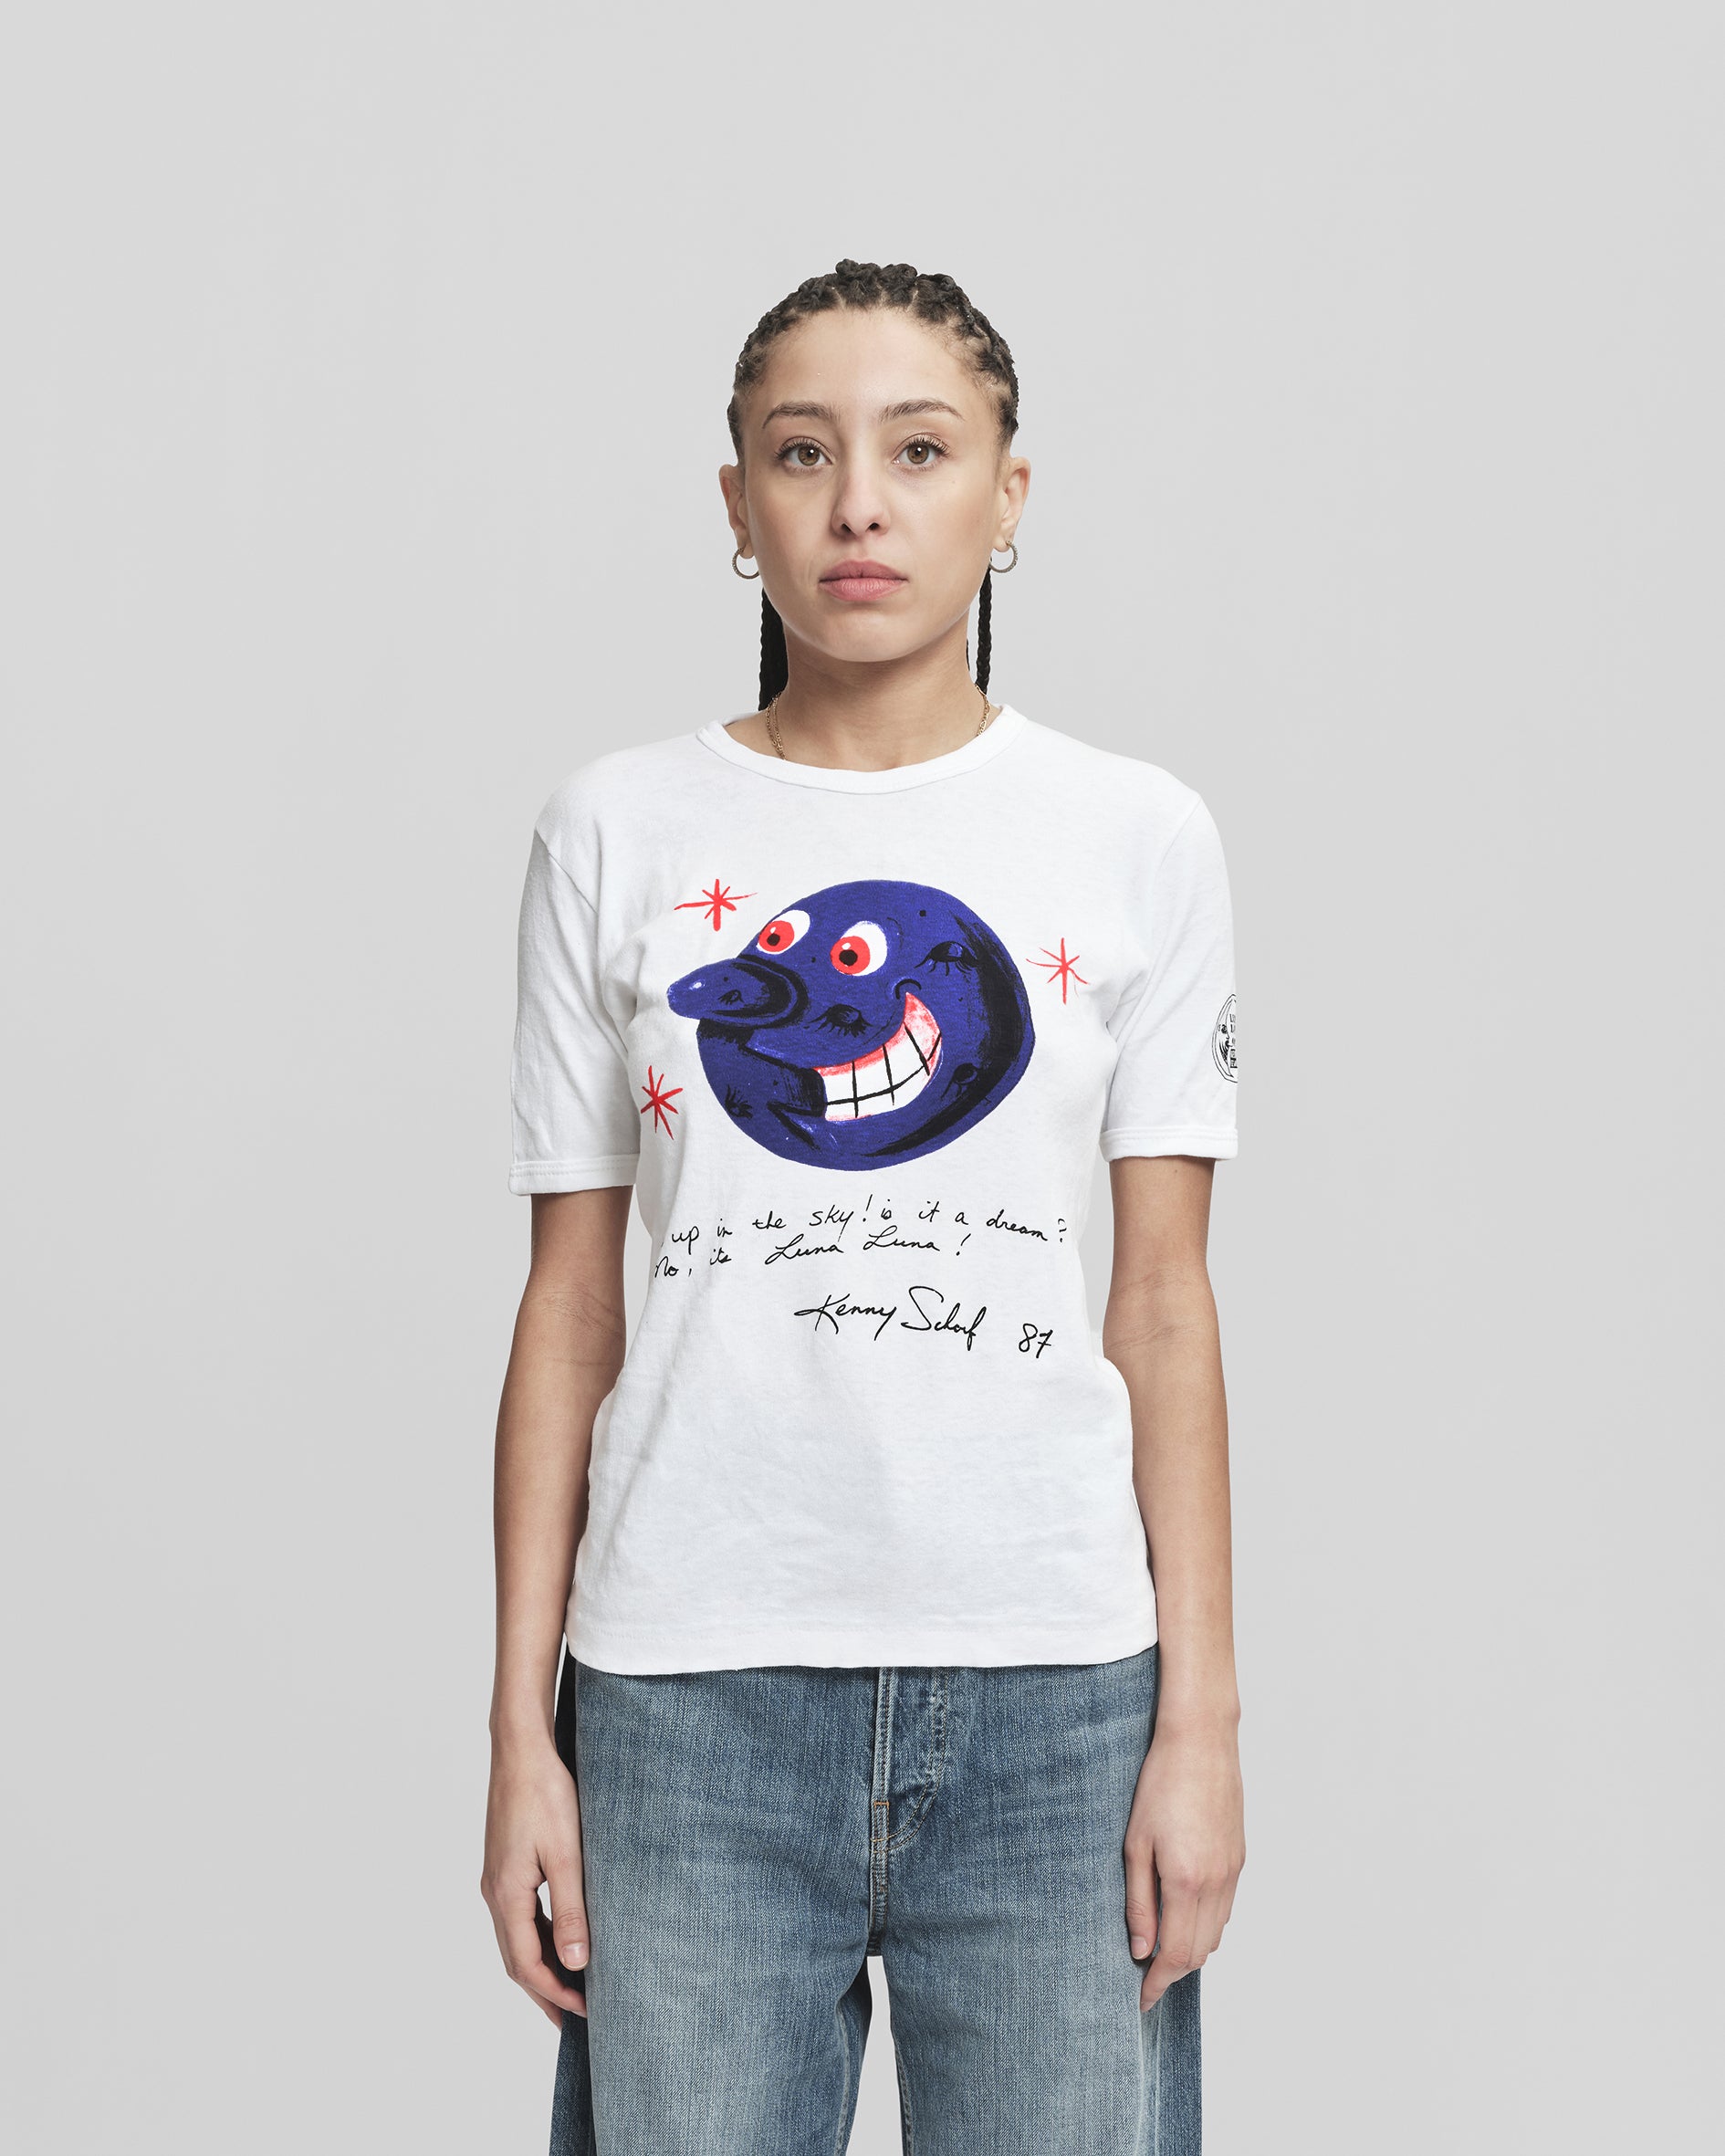 Archival Fitted Kenny Scharf T-Shirt